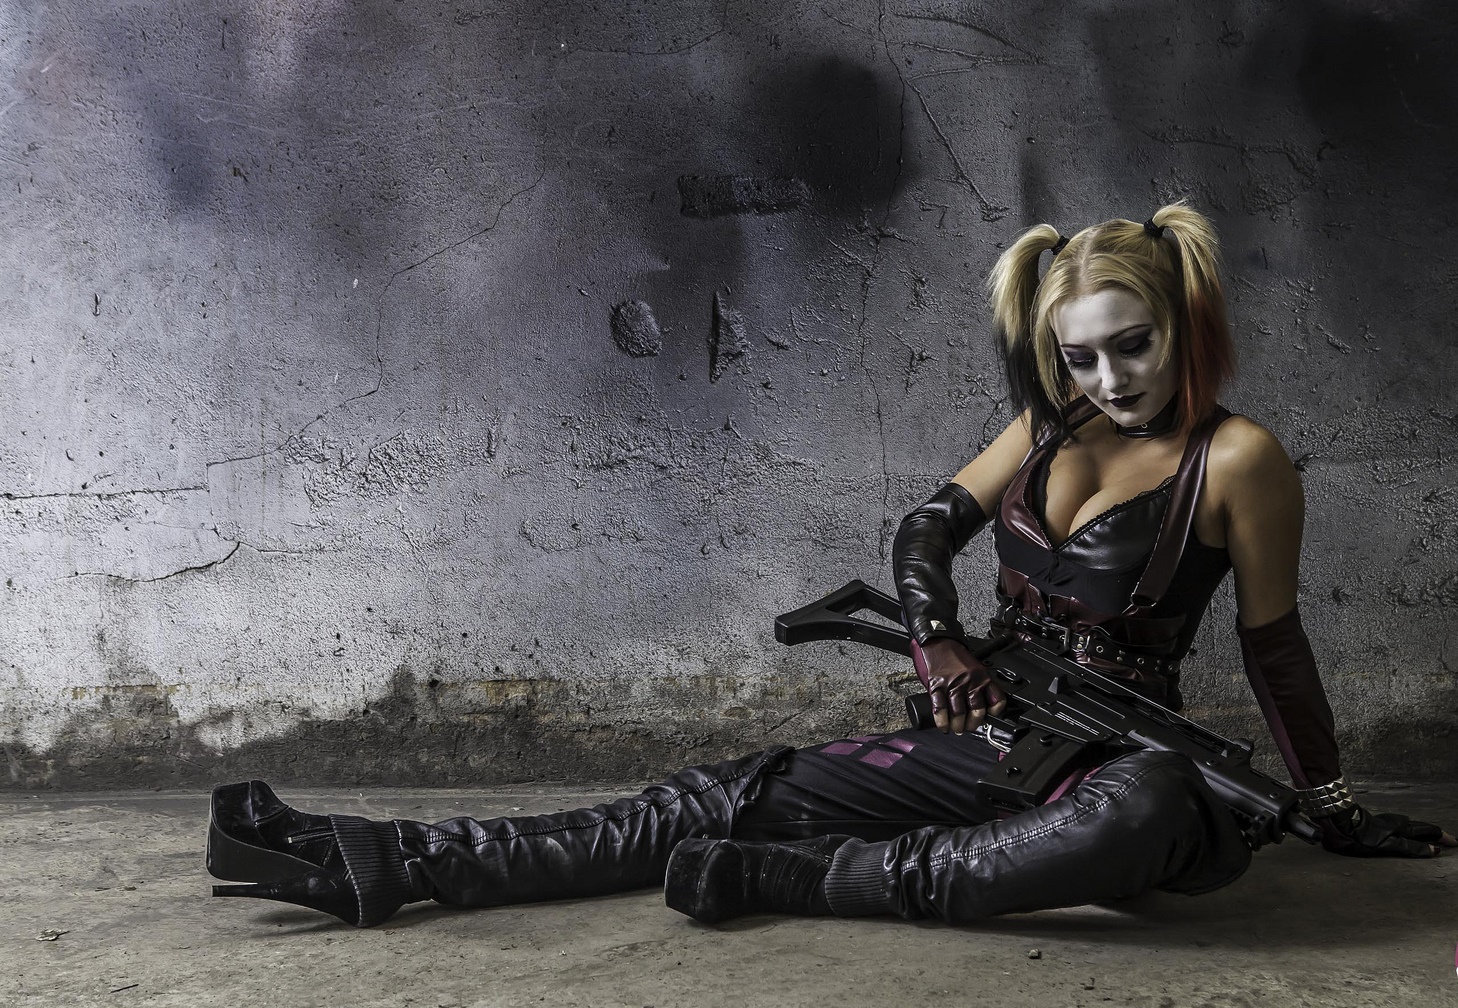 harley quinn hot wallpaper,supervillain,fictional character,fetish model,goth subculture,photography